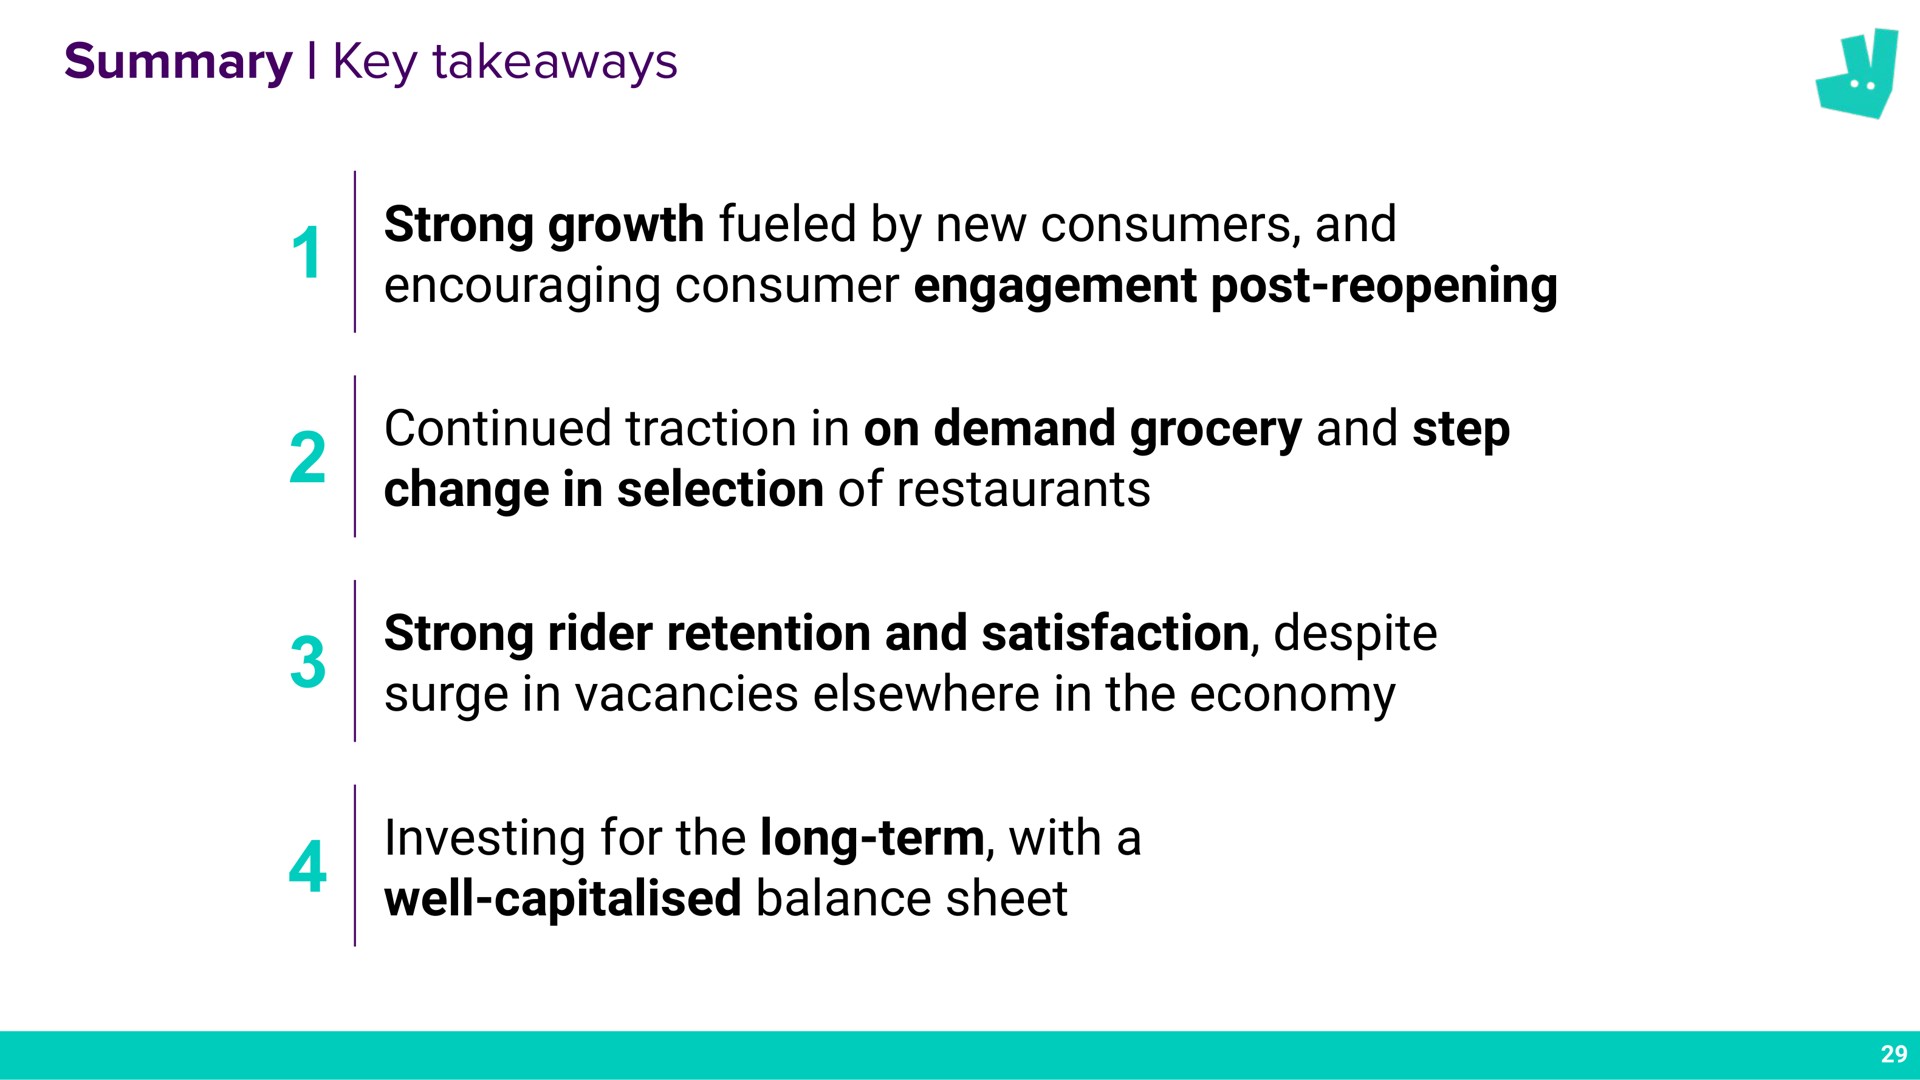 summary key strong growth fueled by new consumers and encouraging consumer engagement post reopening continued traction in on demand grocery and step change in selection of restaurants strong rider retention and satisfaction despite surge in vacancies elsewhere in the economy investing for the long term with a well balance sheet | Deliveroo